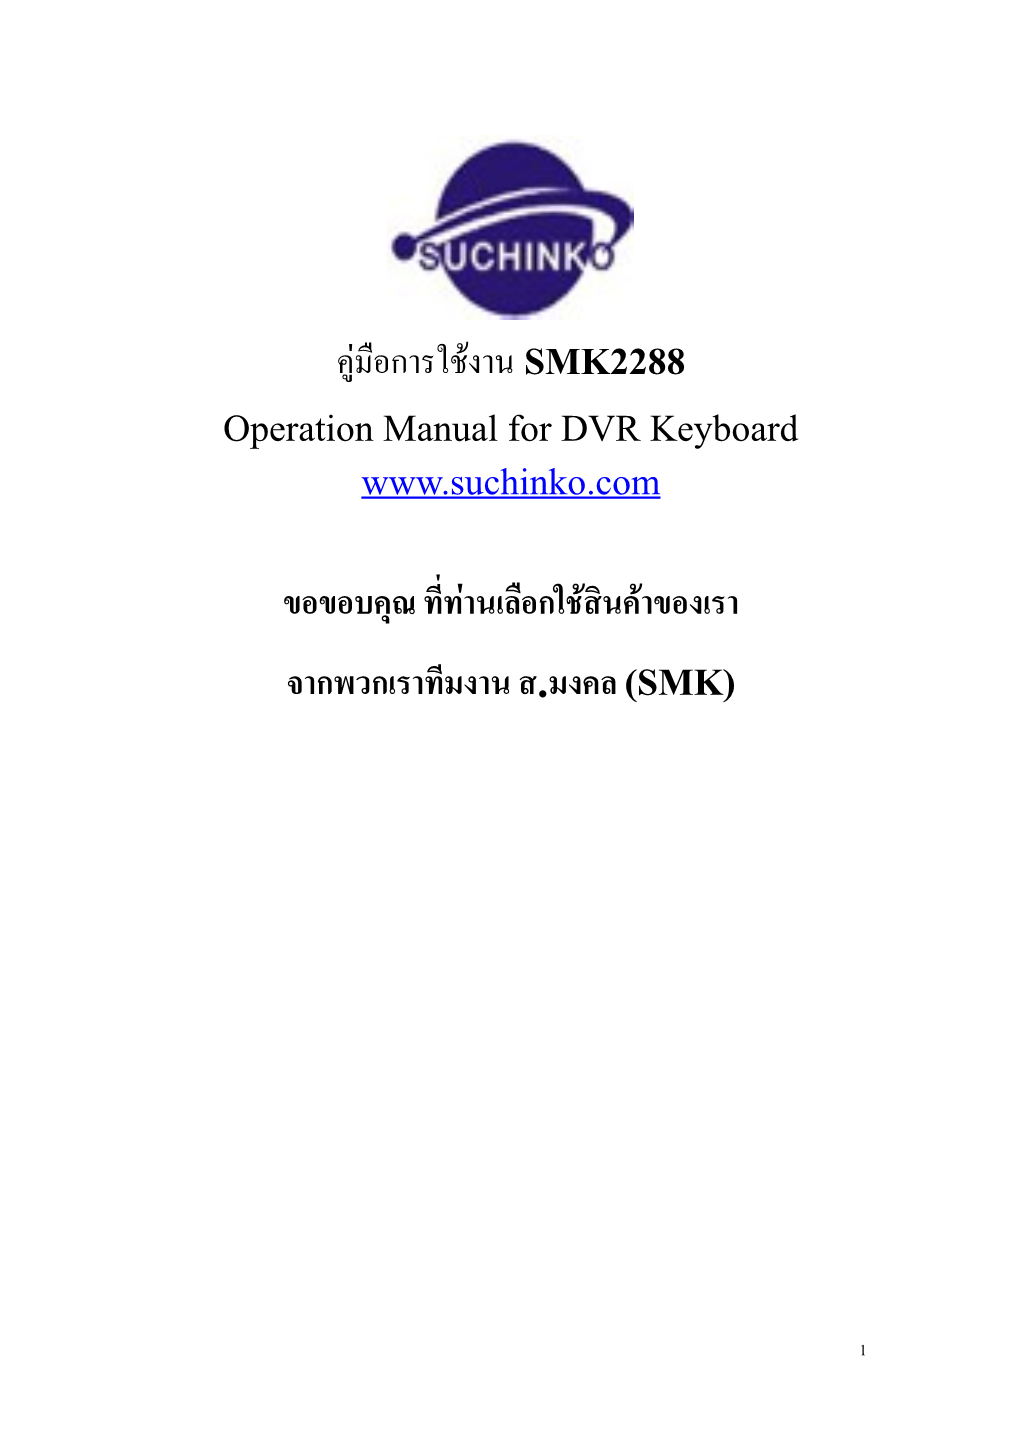 Operation Manual for DVR Keyboard